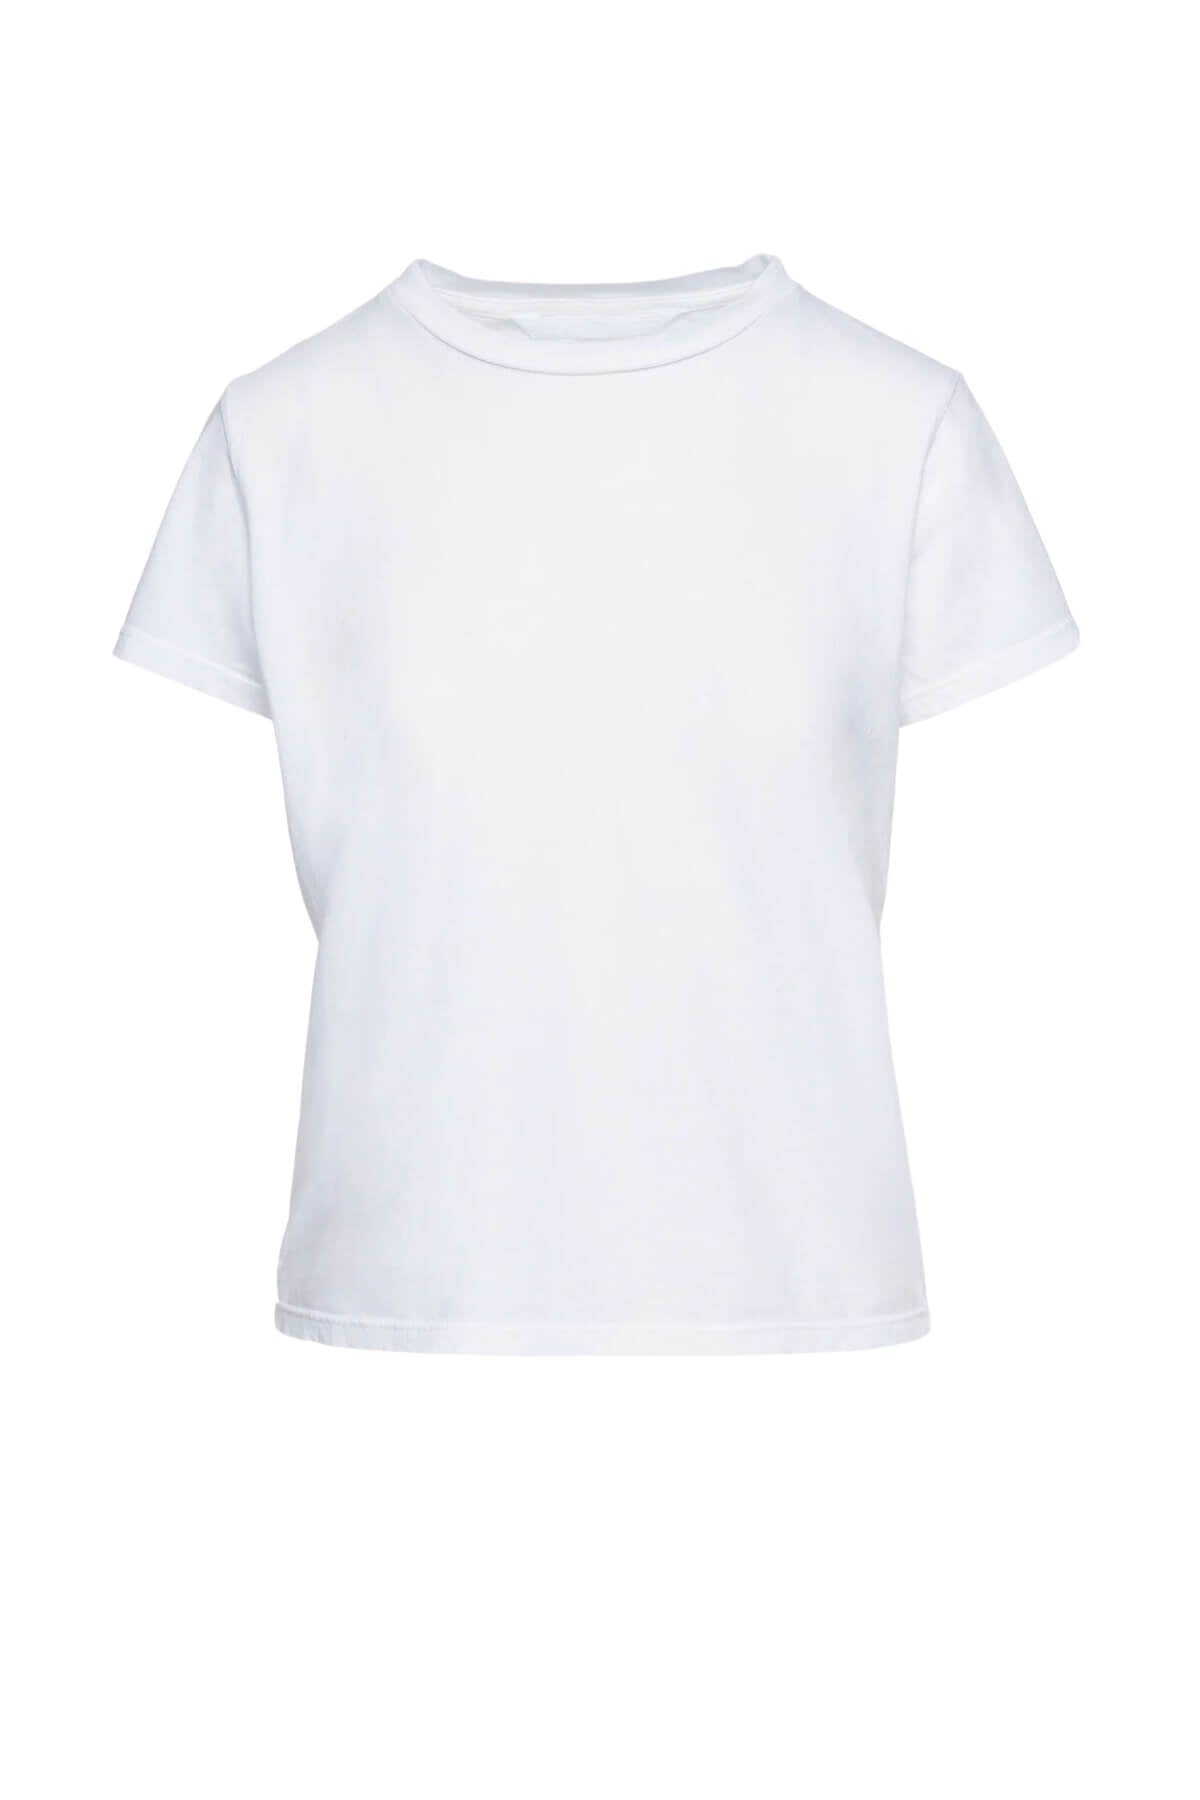 Mother Denim The Lil Goodie Goodie T-Shirt - Bright White